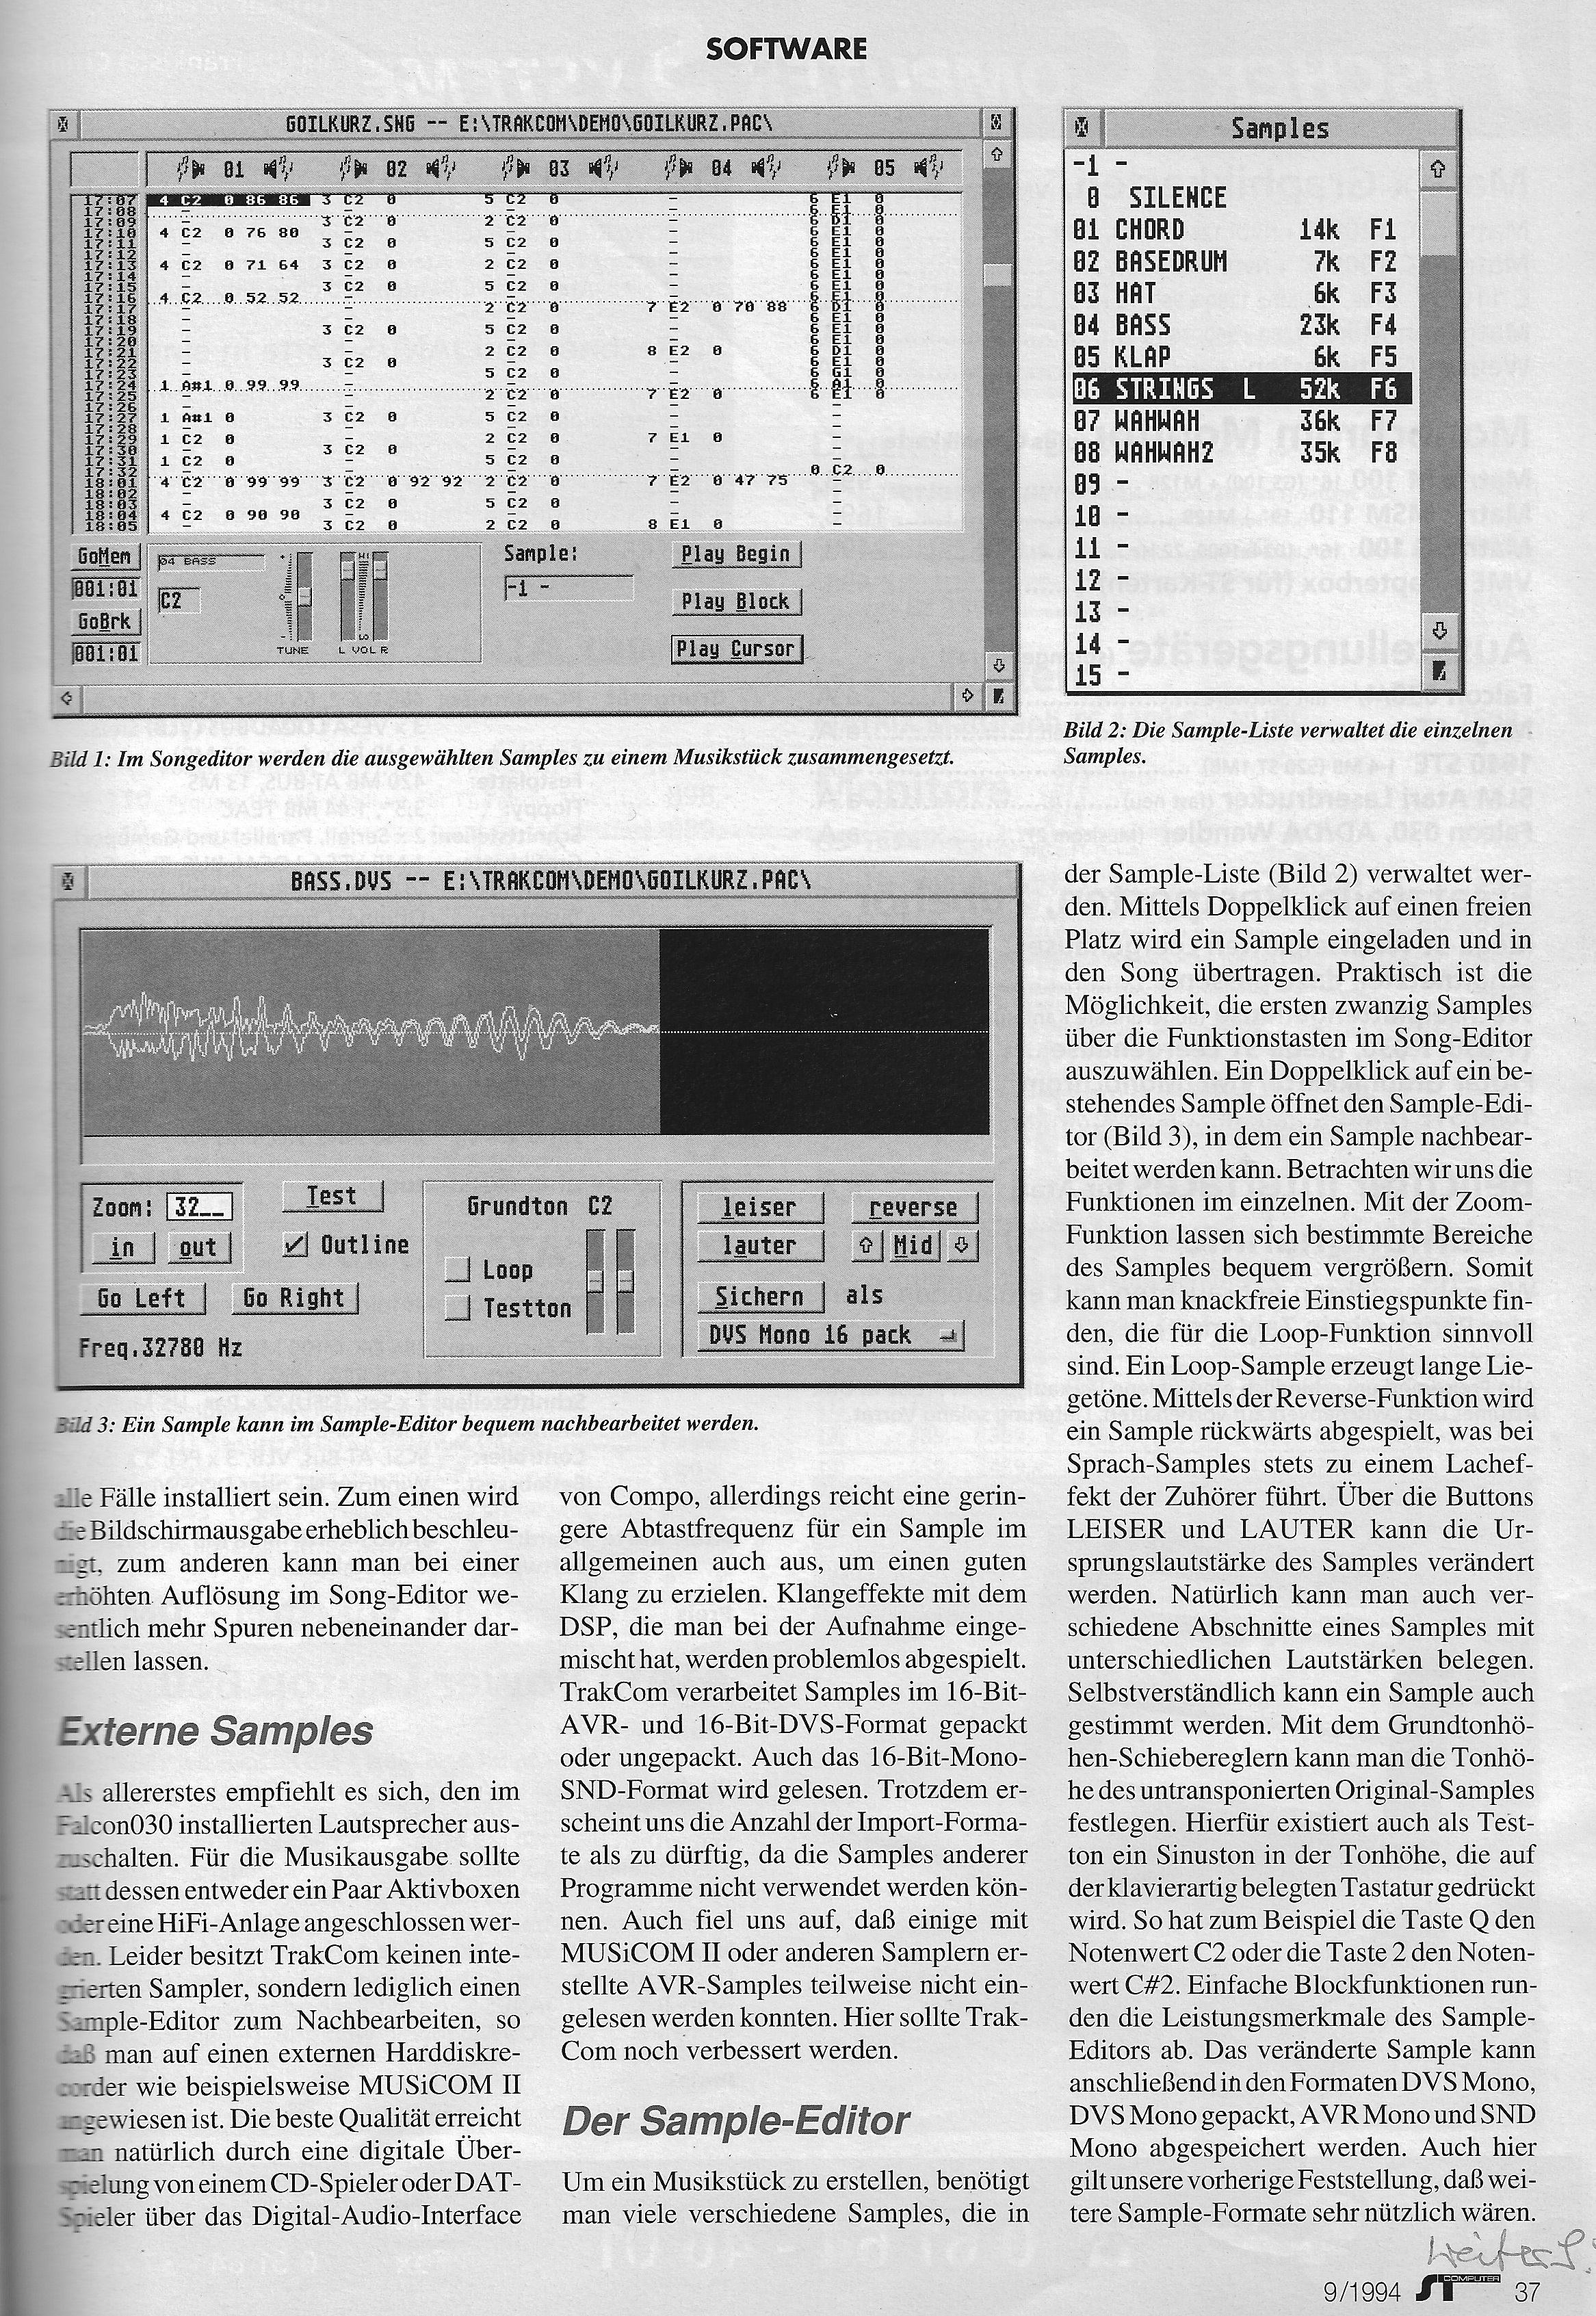 ST Computer issue 09/1994, page 37